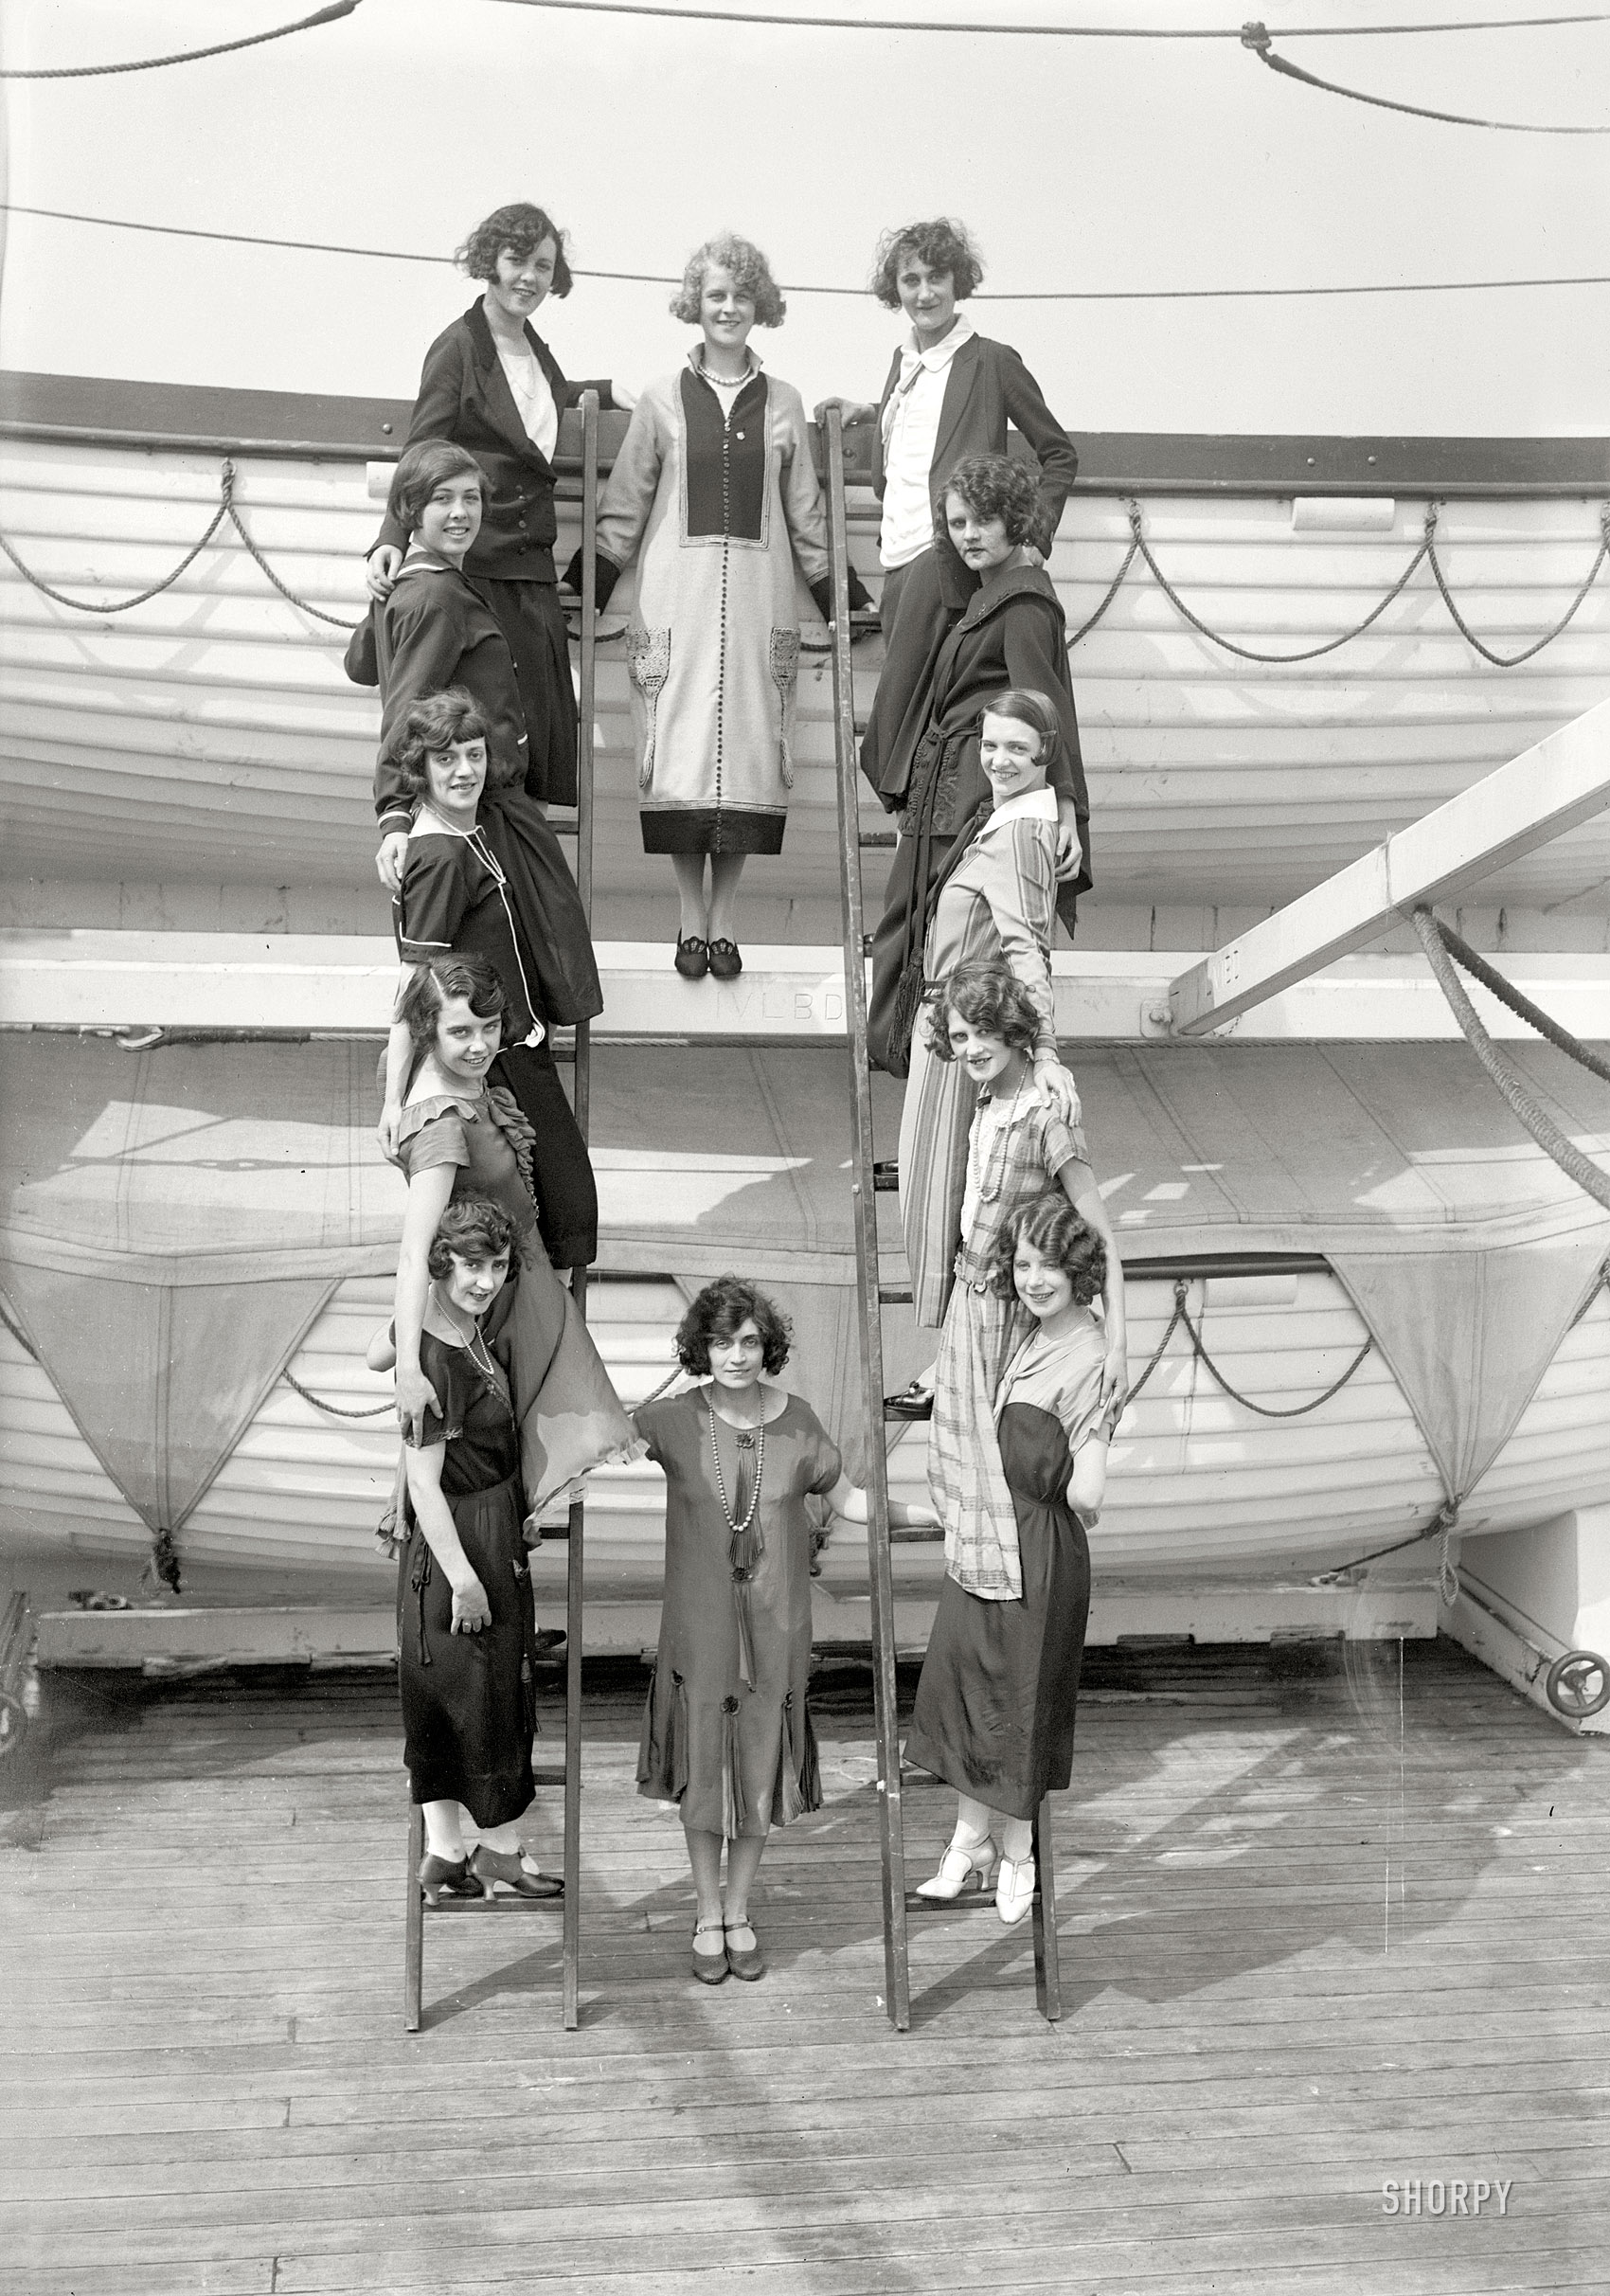 New York circa 1925. "Tiller girls." Arriving from England, 12 chorus girls in the troupe originated by British musical-theater impresario and precision-dancing pioneer John Tiller. 5x7 glass negative, Bain News Service. View full size.